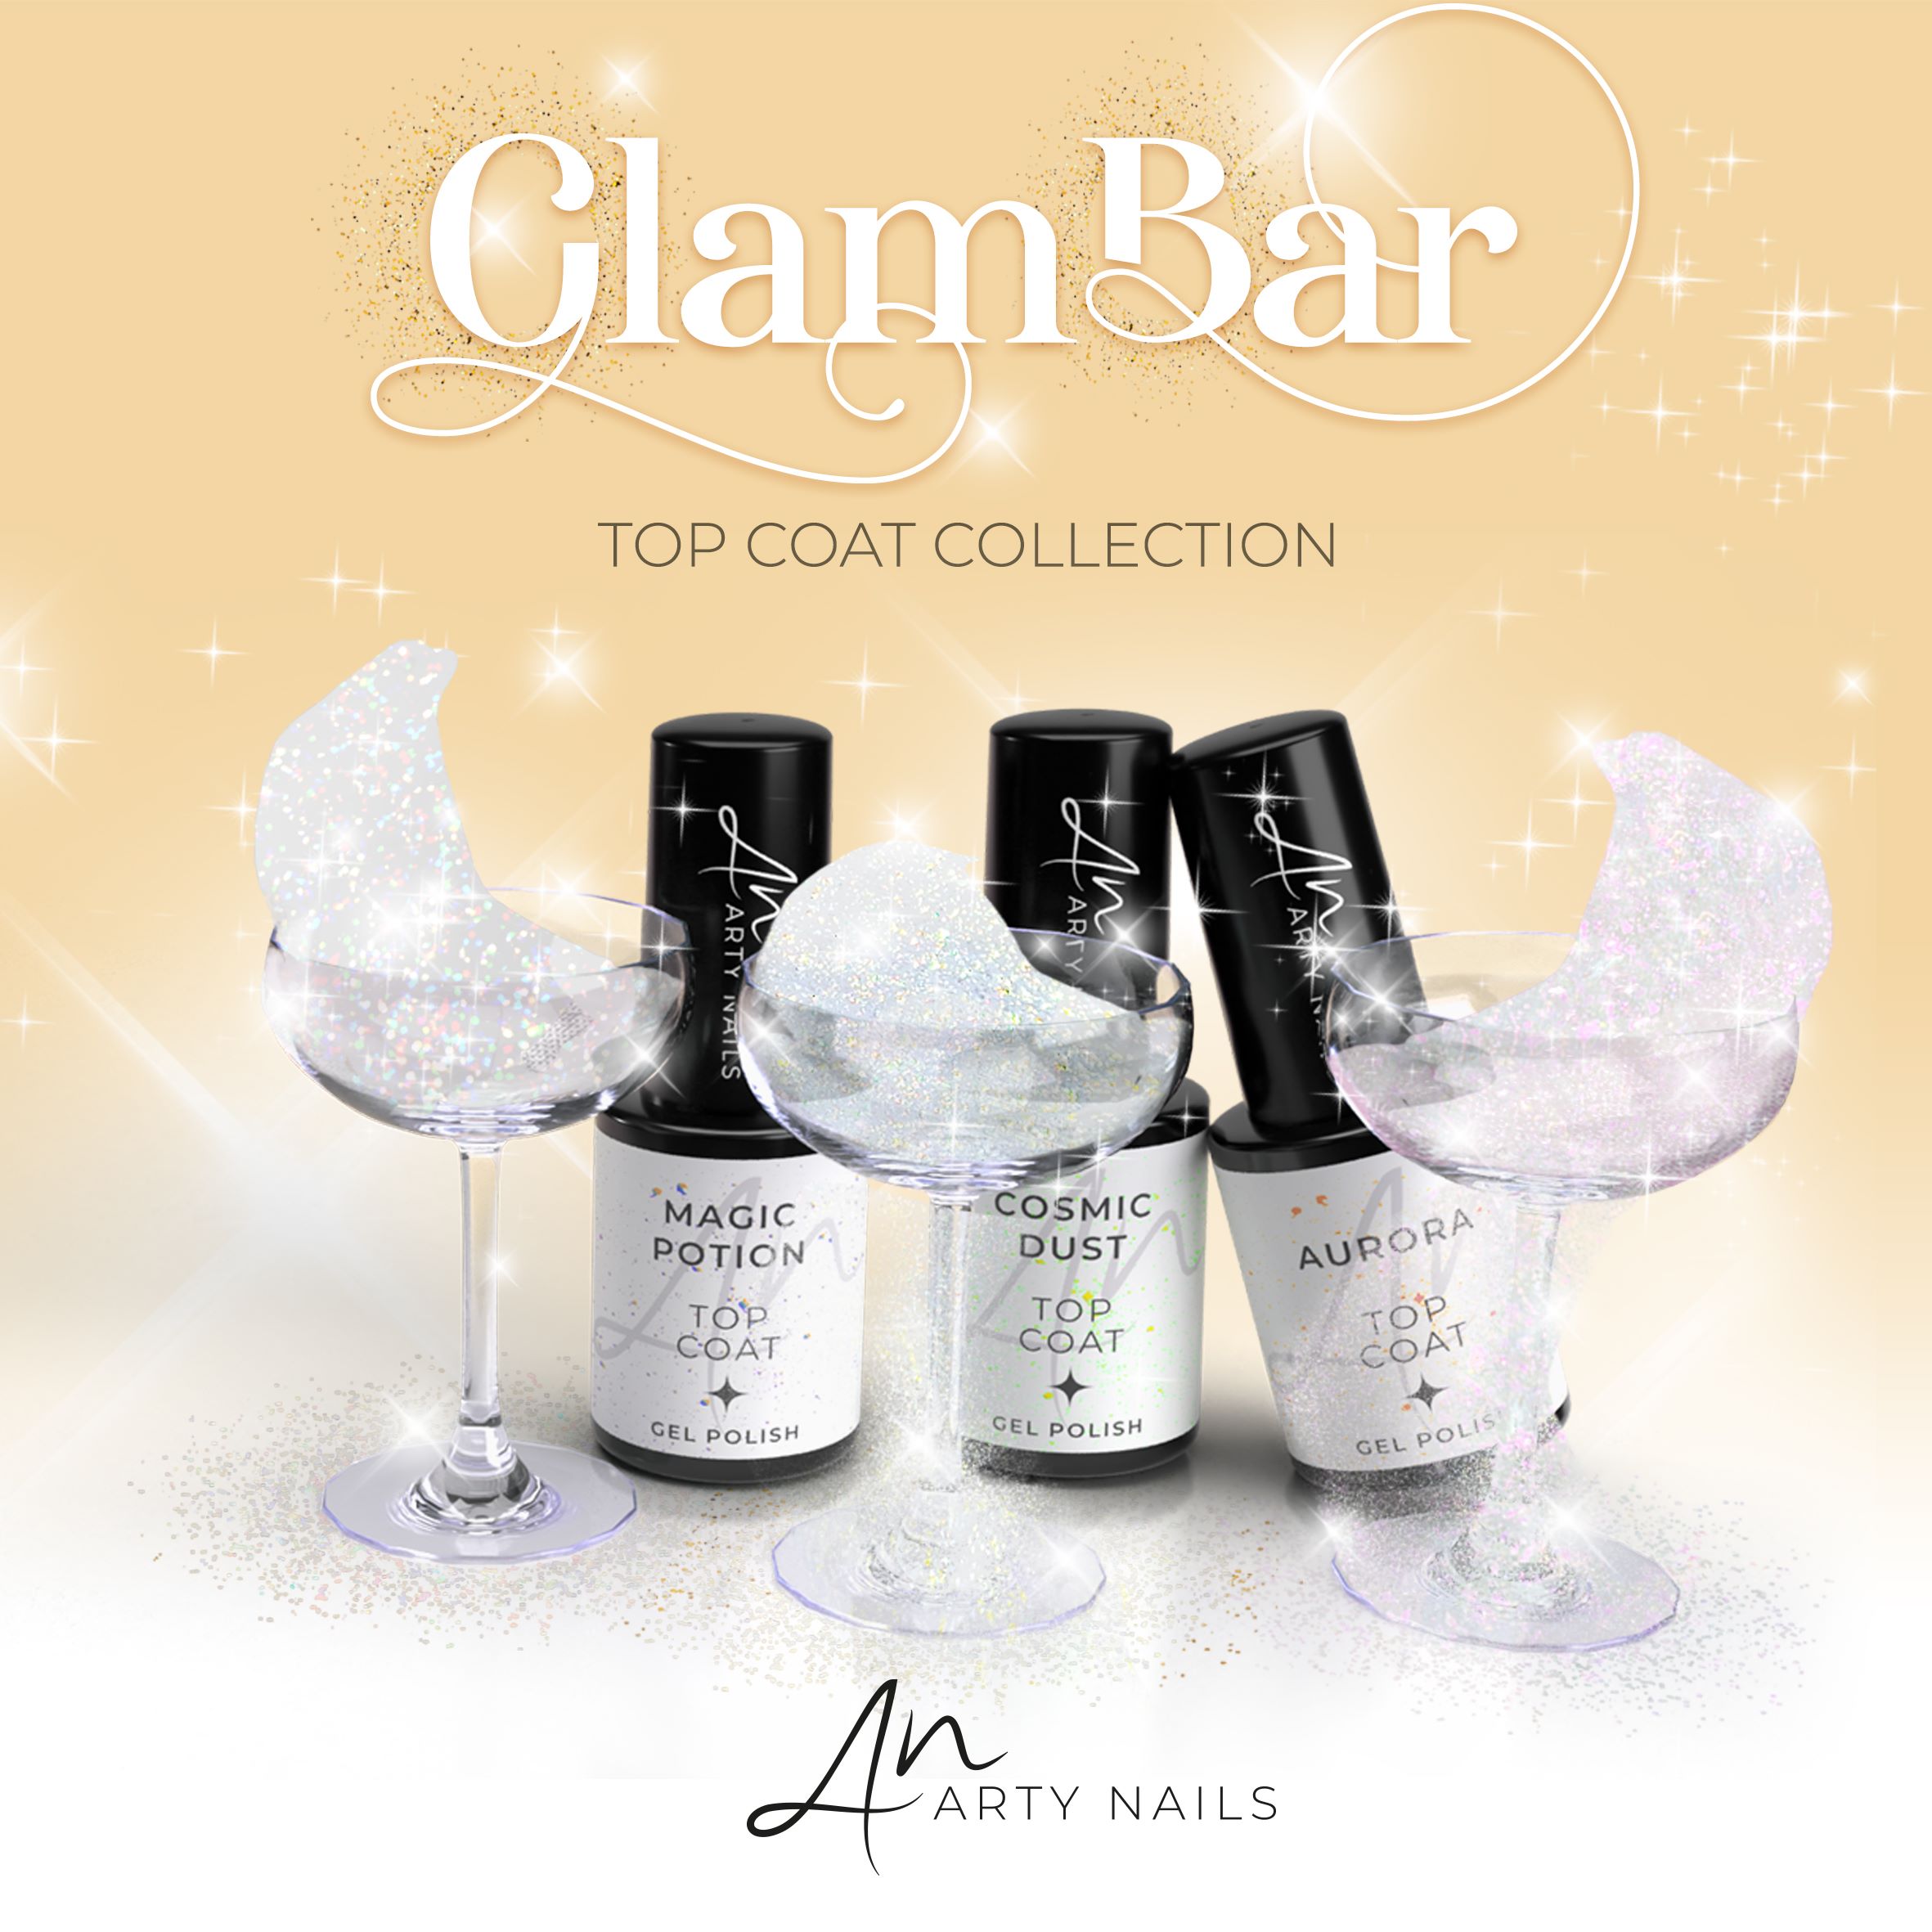 arty nails glam bar top coat collection